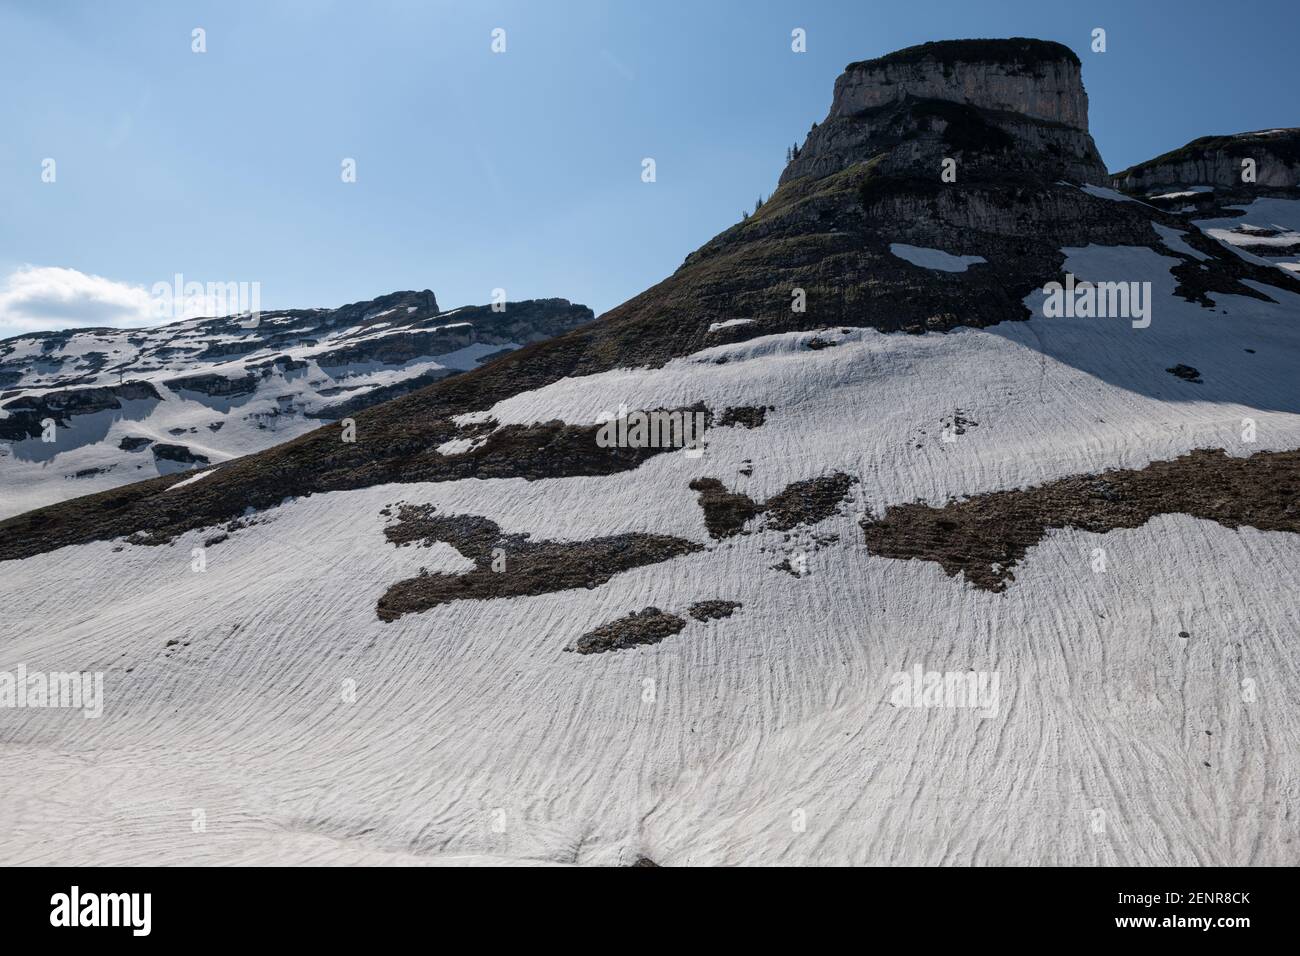 Early spring up on Loser mountain with melting snow and rock formations  on a sunny day, Altaussee, Loser, Salzkammergut, Austria Stock Photo